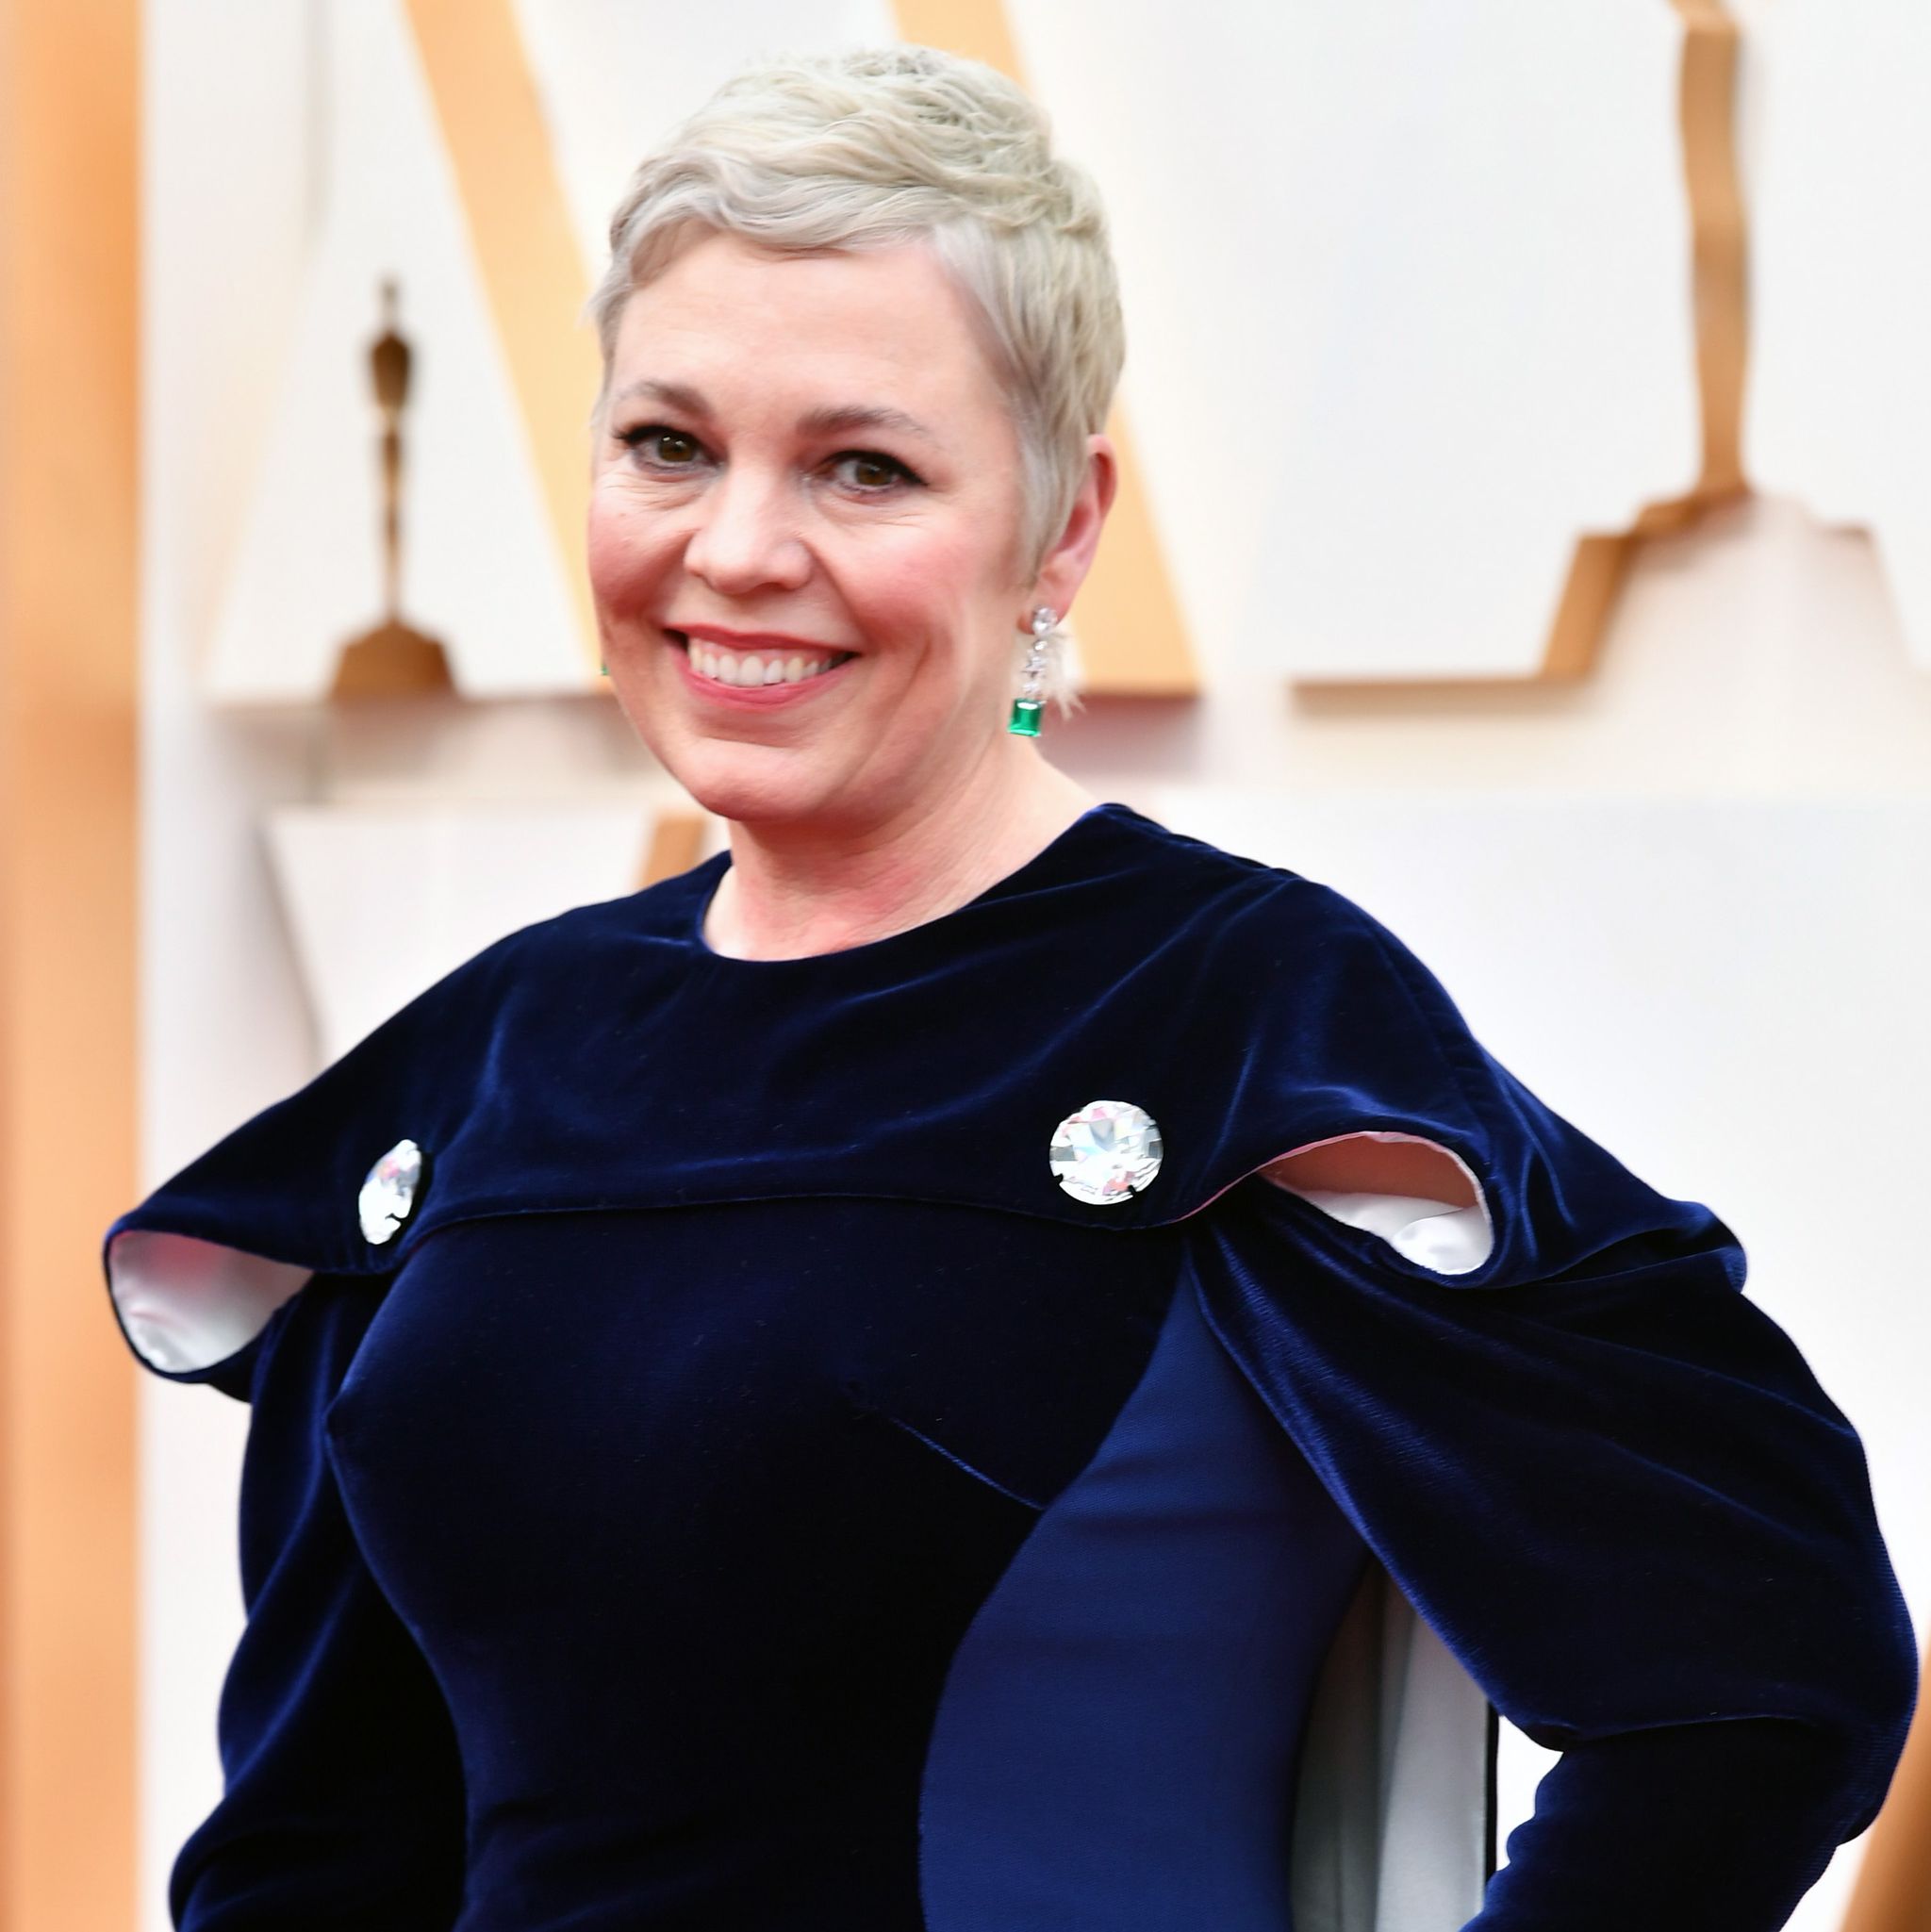 92nd Annual Academy Awards - Olivia Coleman goes blonde for the Oscars 2020